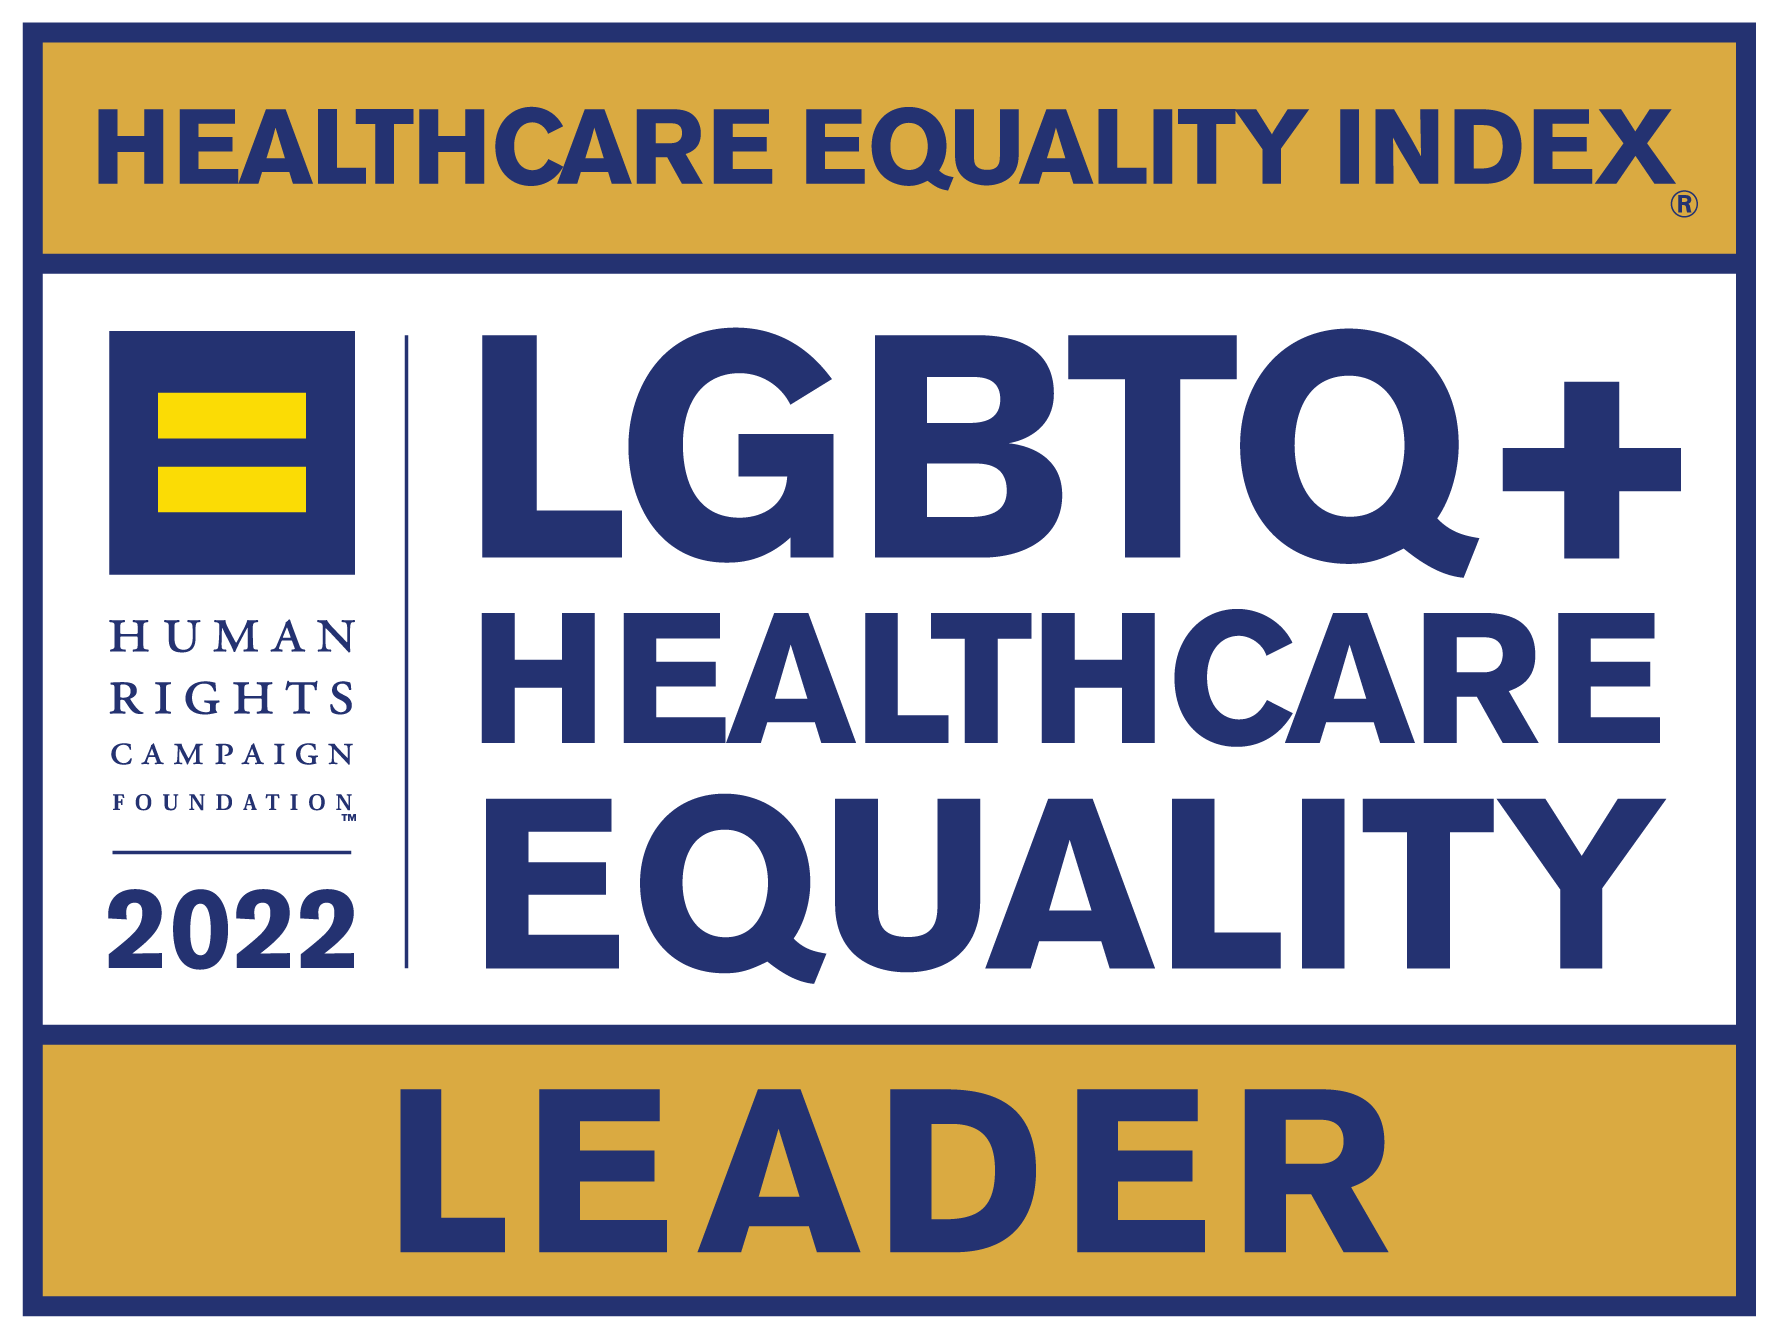 2022 HEI Leader Badge - A badge signifying FHCN is a leader in Healthcare Equality Index for 2022